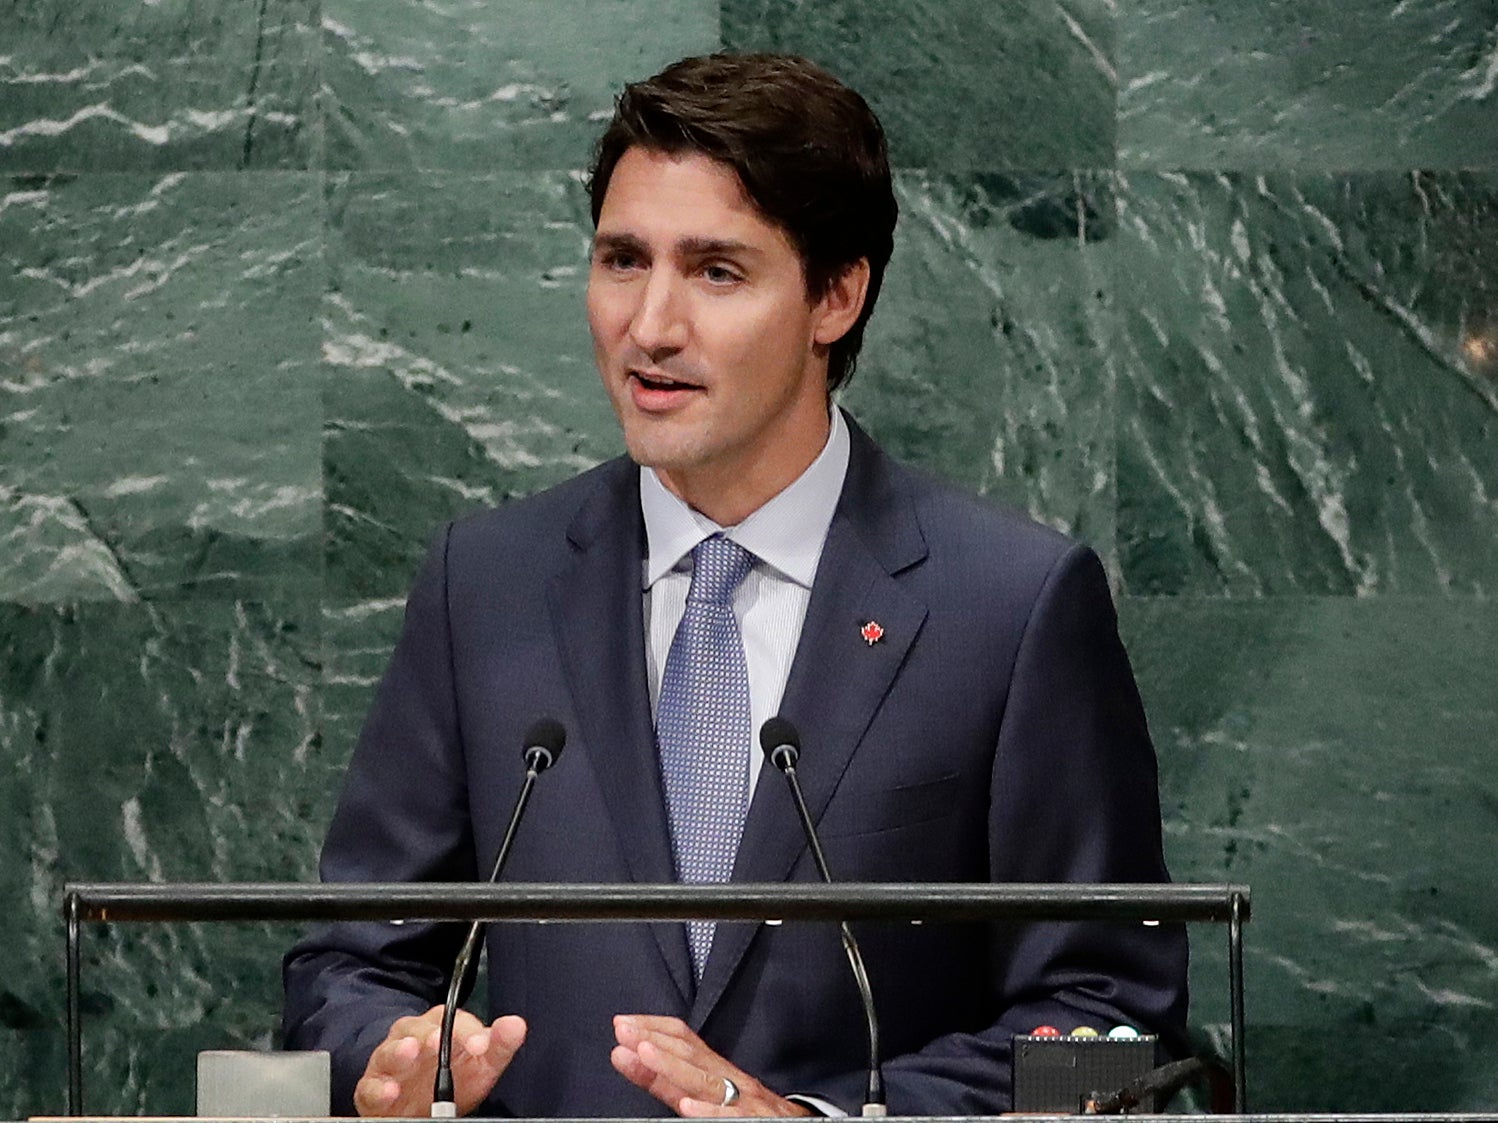 Trudeau was to meet with European Union leaders in Brussels on Sunday in order to sign a free trade agreement with the EU which has already been plagued with delays